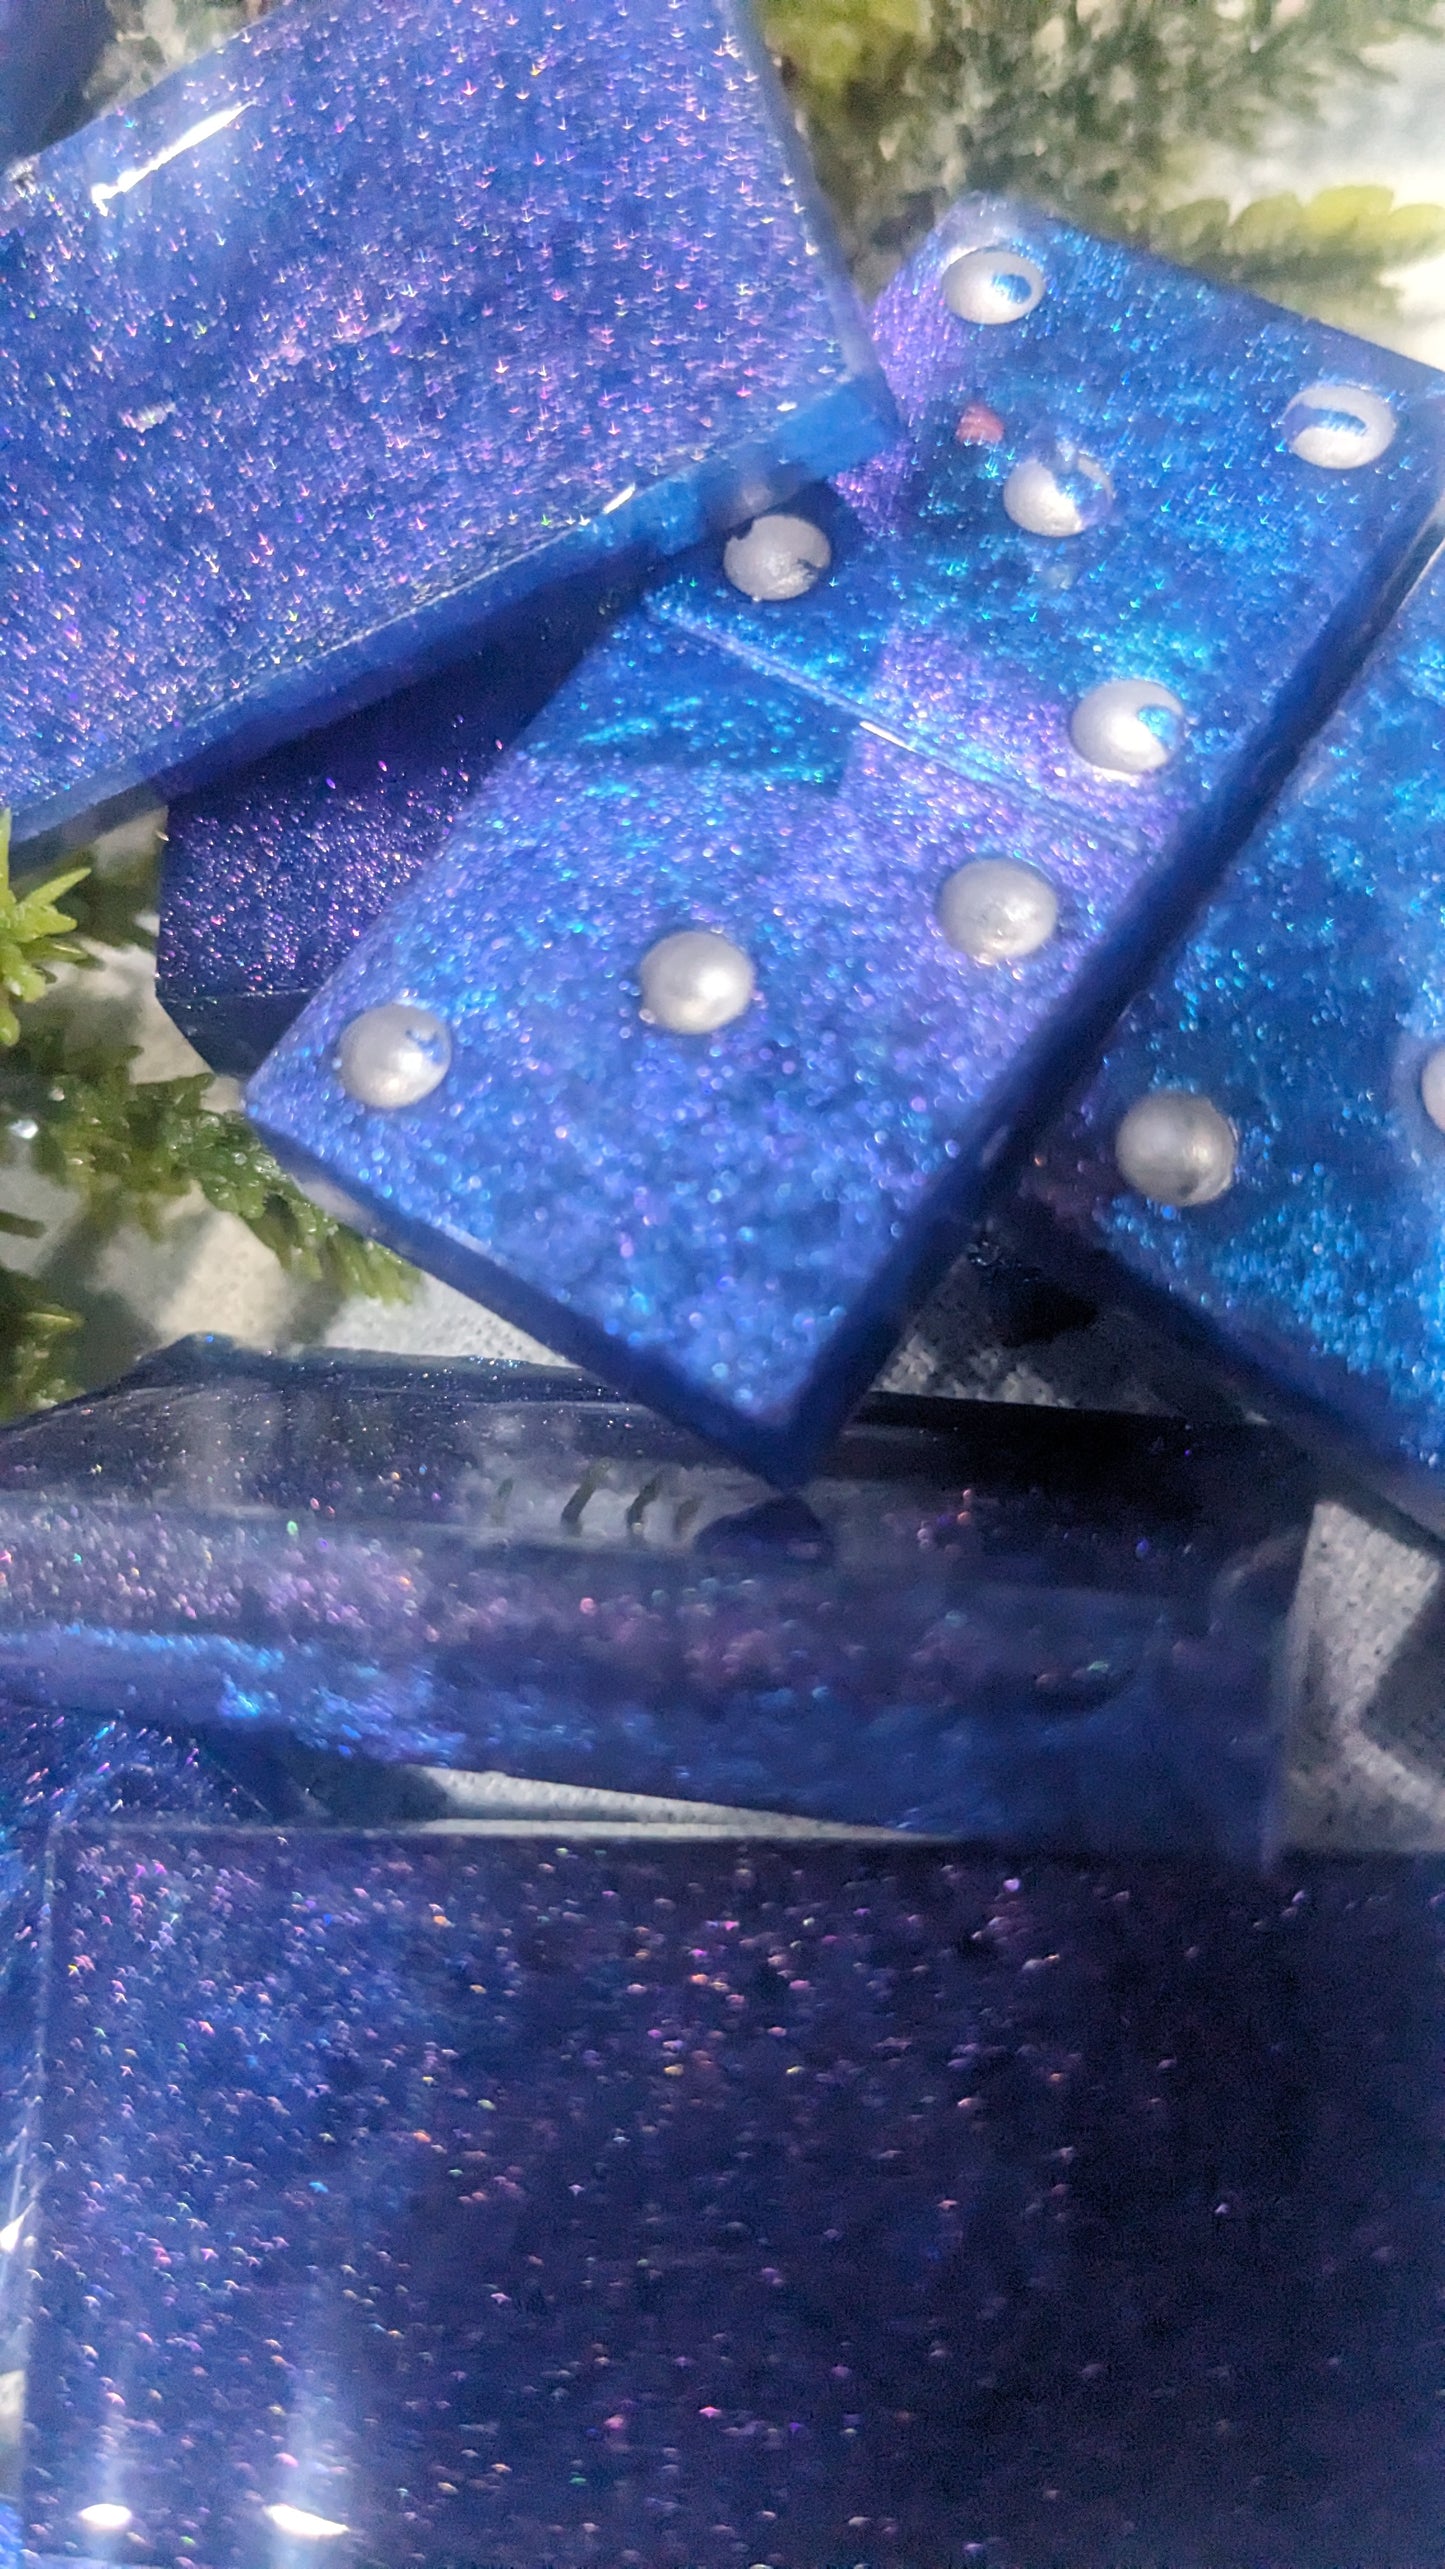 This is a set of handcrafted resin dominoes color changing blue and purple